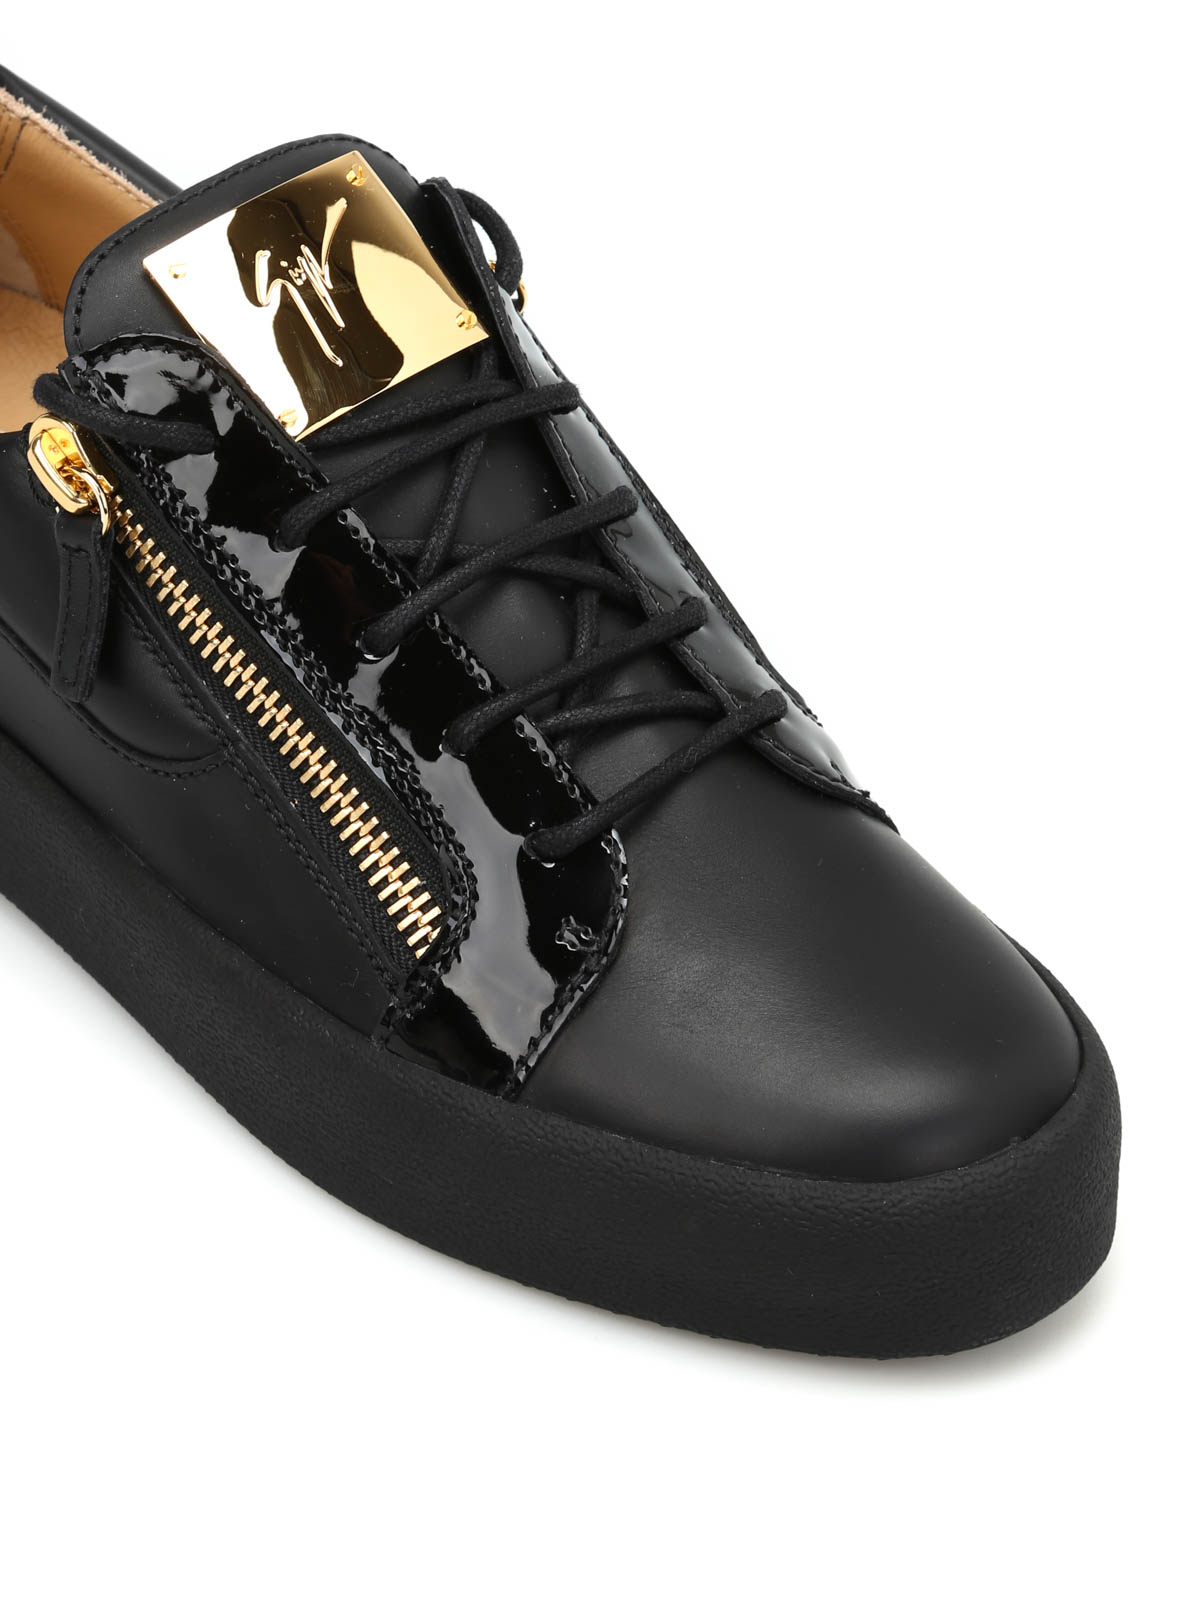 Trainers Giuseppe Zanotti - Leather low top sneakers - RM7000005